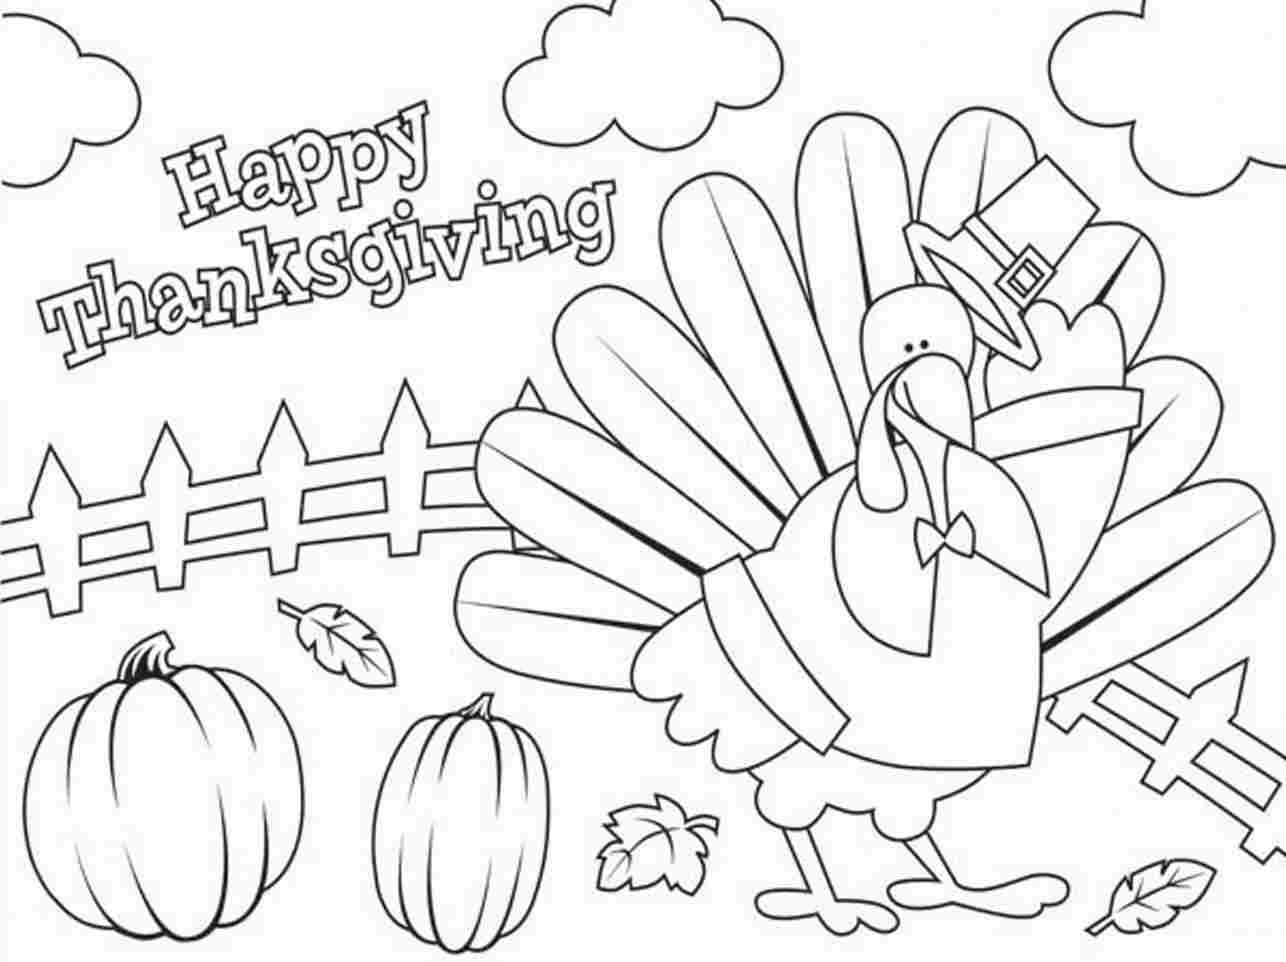 Disney Princess Thanksgiving Coloring Pages at GetColorings.com | Free